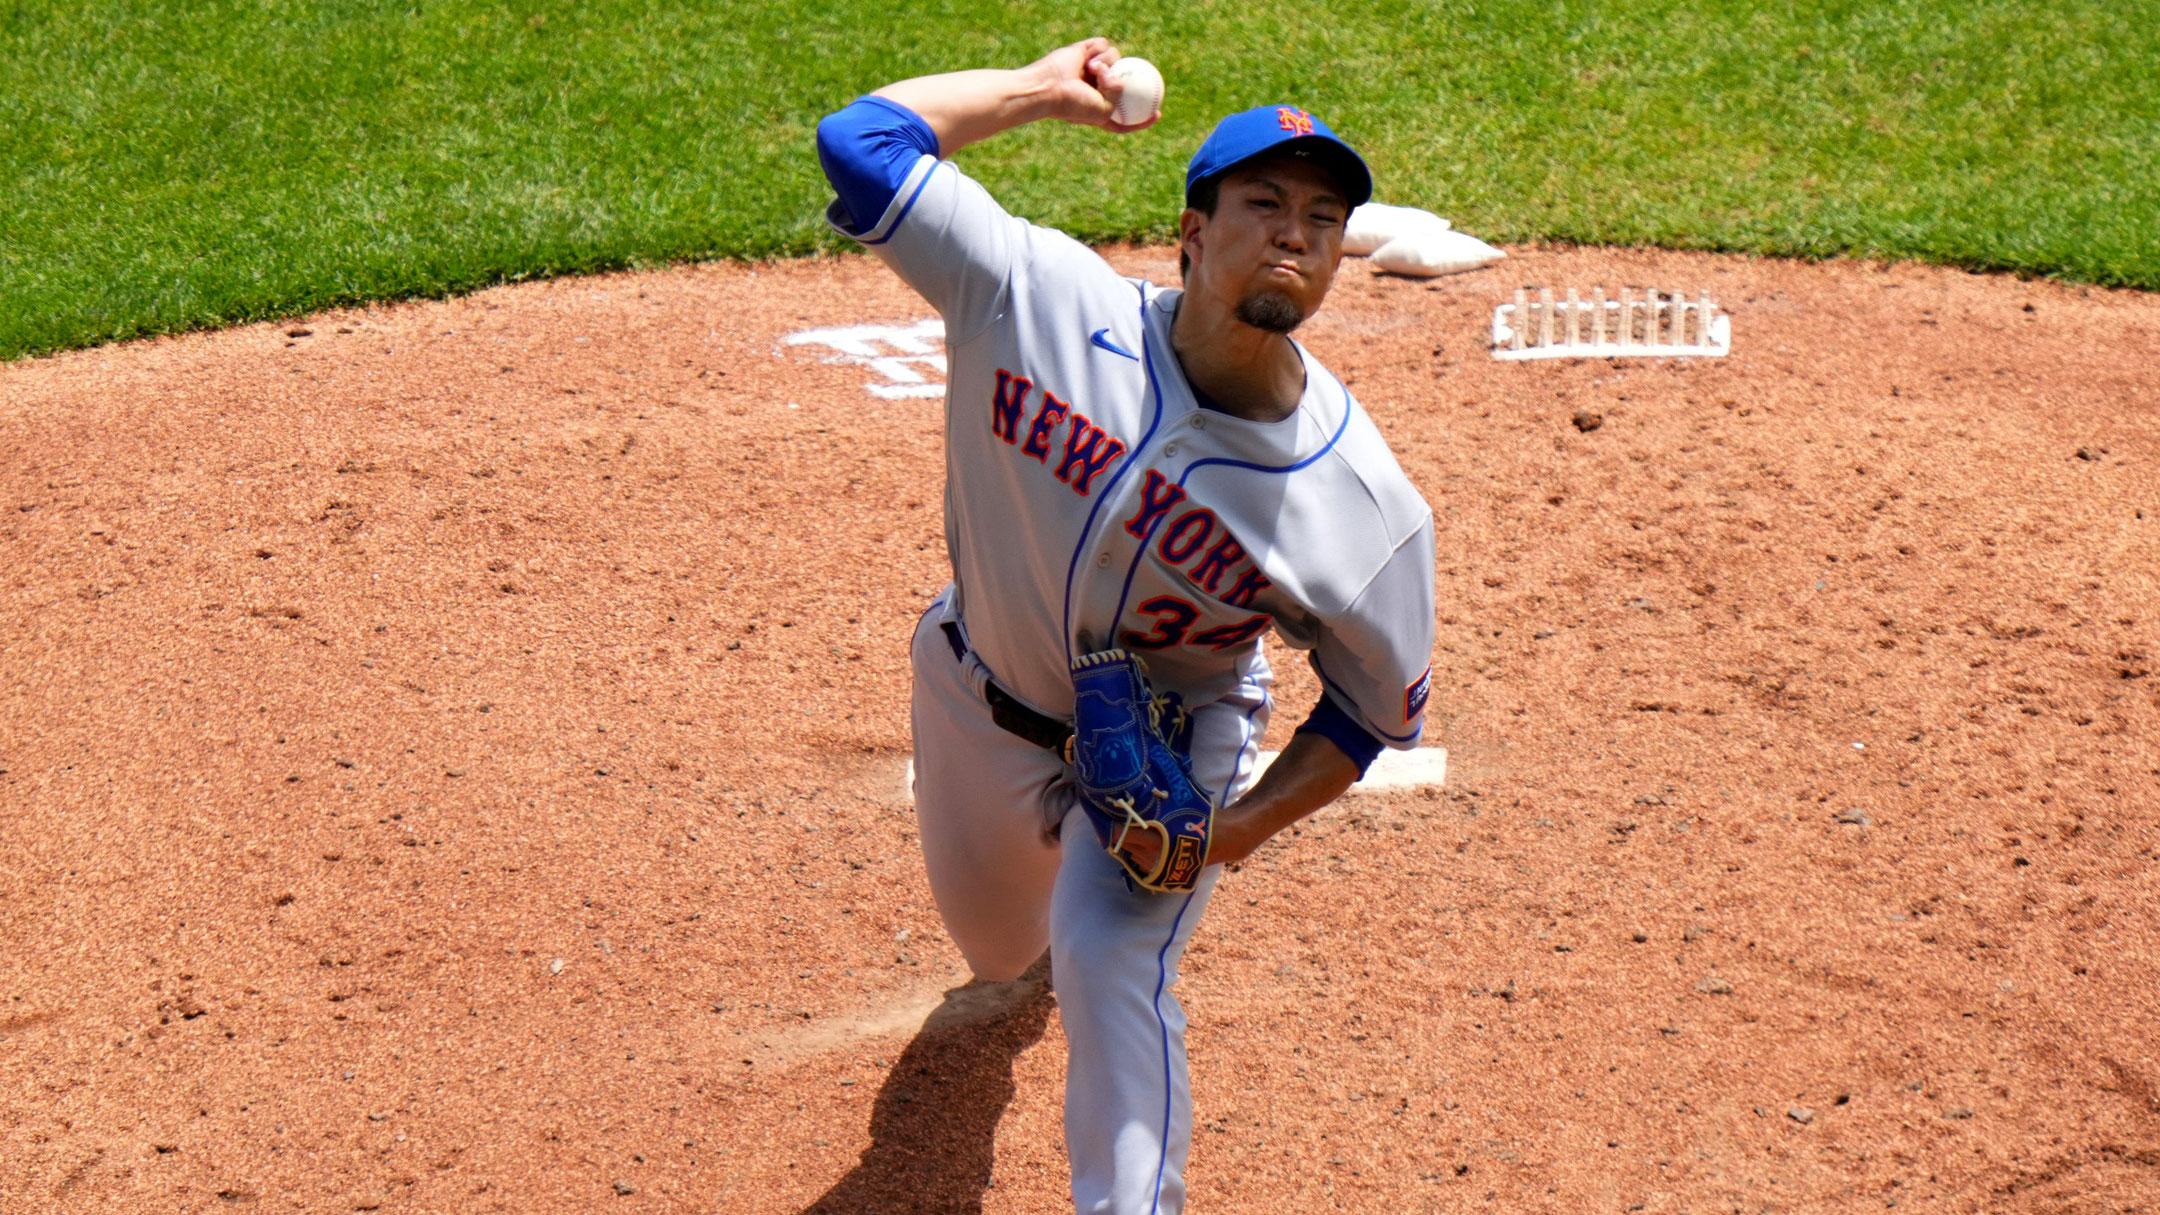 New York Mets starting pitcher Kodai Senga (34) delivers in the third inning of a baseball game between the New York Mets and the Cincinnati Reds, Thursday, May 11, 2023, in Cincinnati / Kareem Elgazzar/The Enquirer / USA TODAY NETWORK